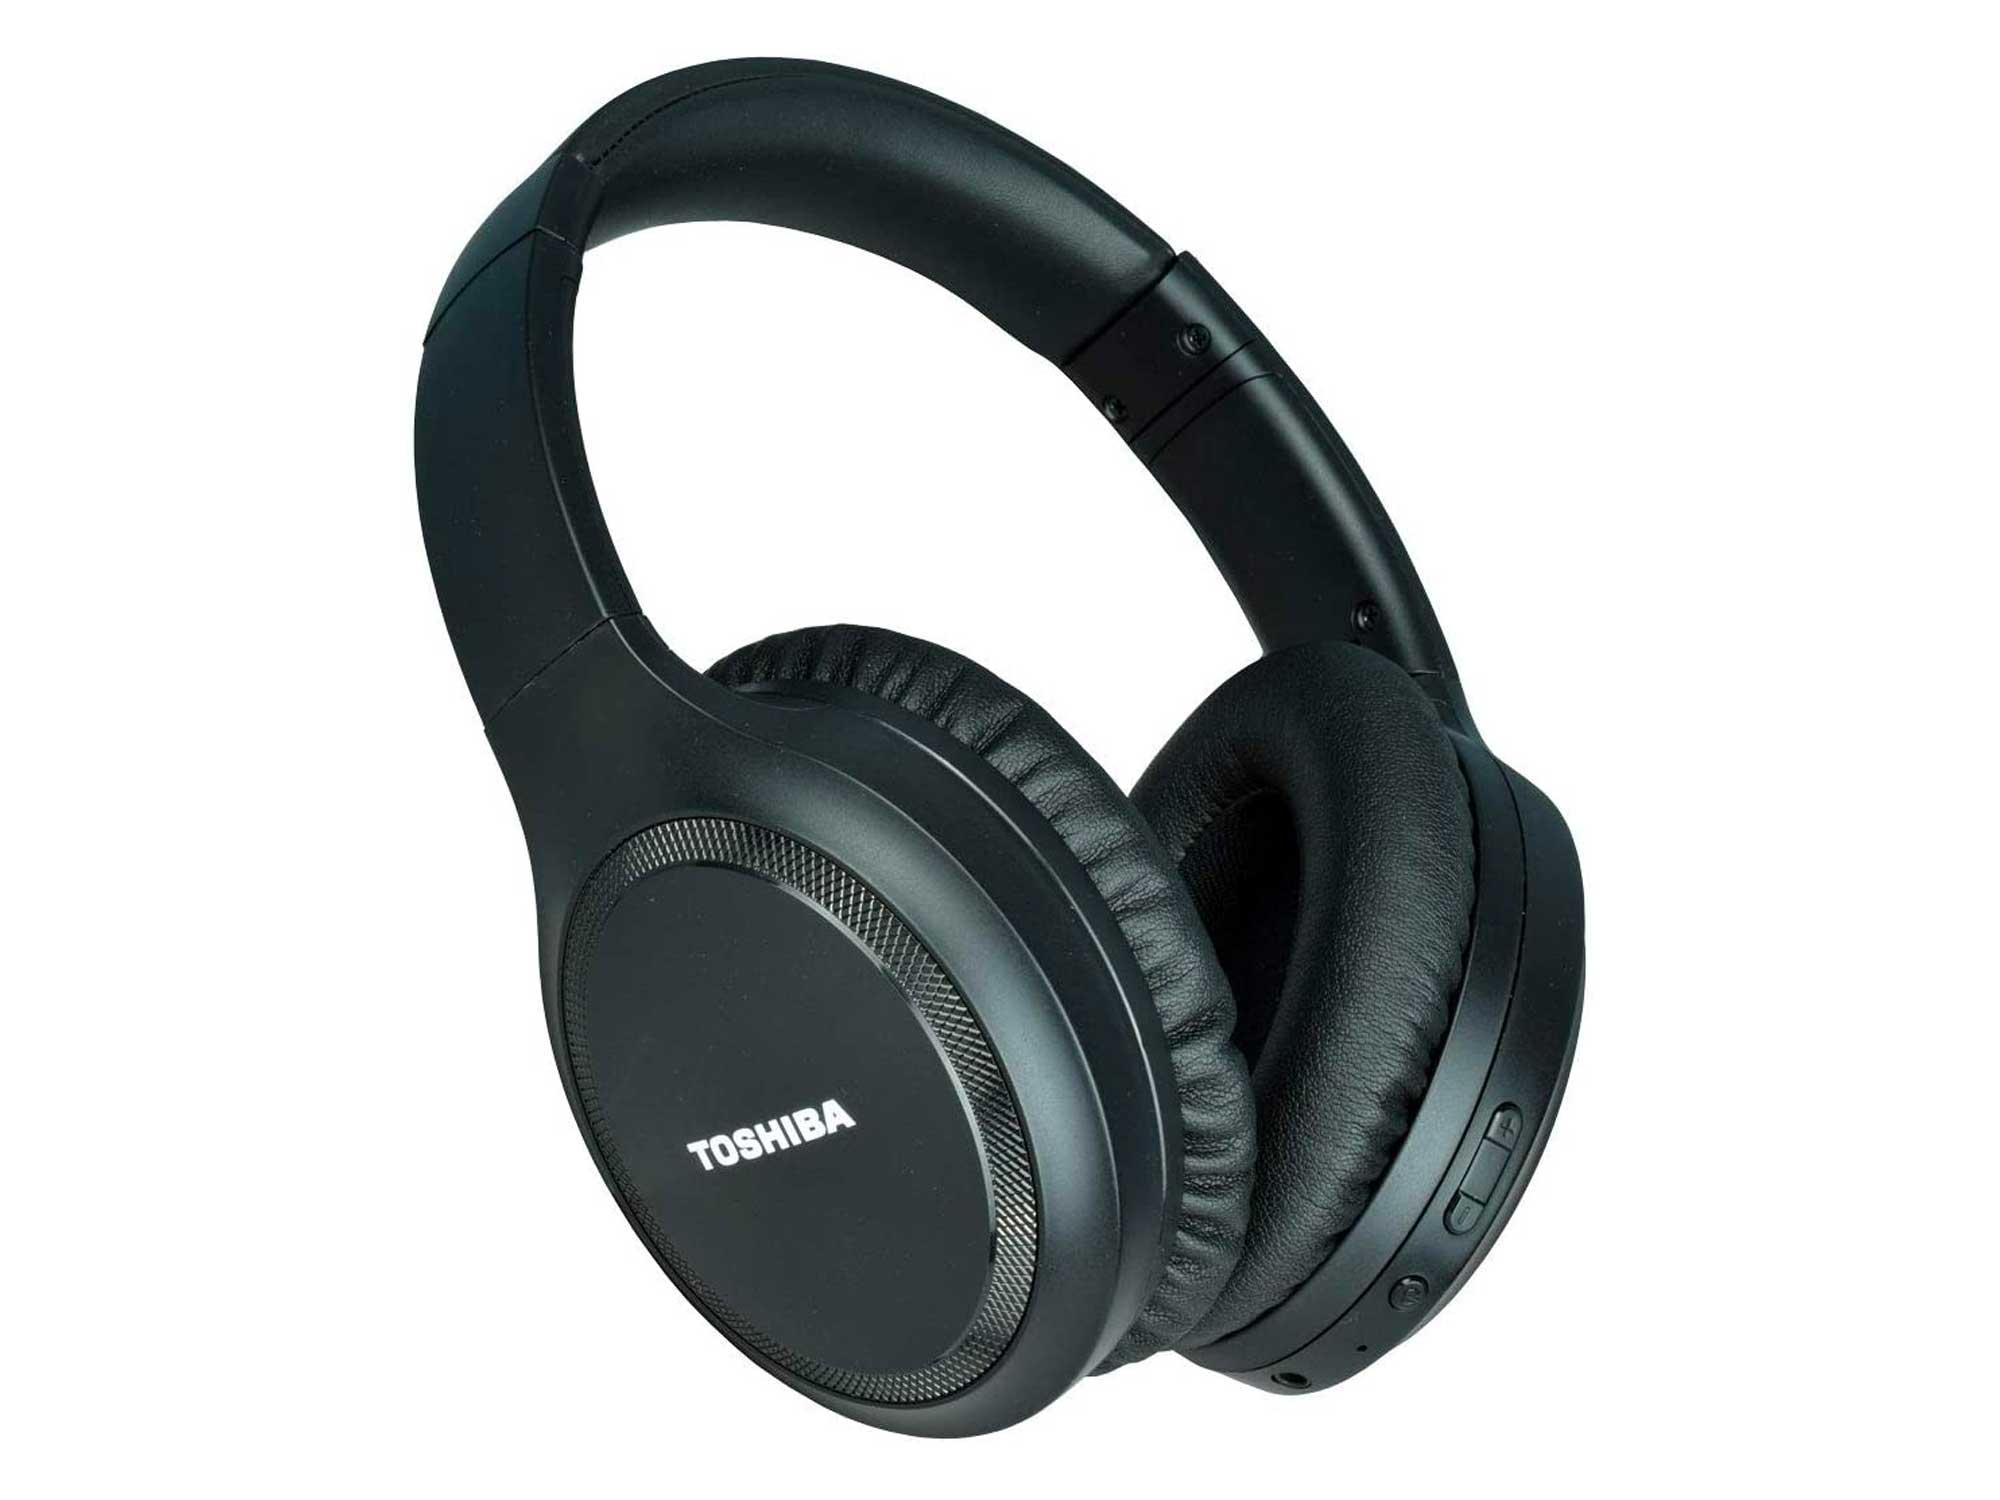 Toshiba Noise Cancelling Bluetooth Headphones | Wireless Over Ear Headphones | Bluetooth Headset with Microphone | 20 Hours of Talk & Music Time | 33 FT Operating Range